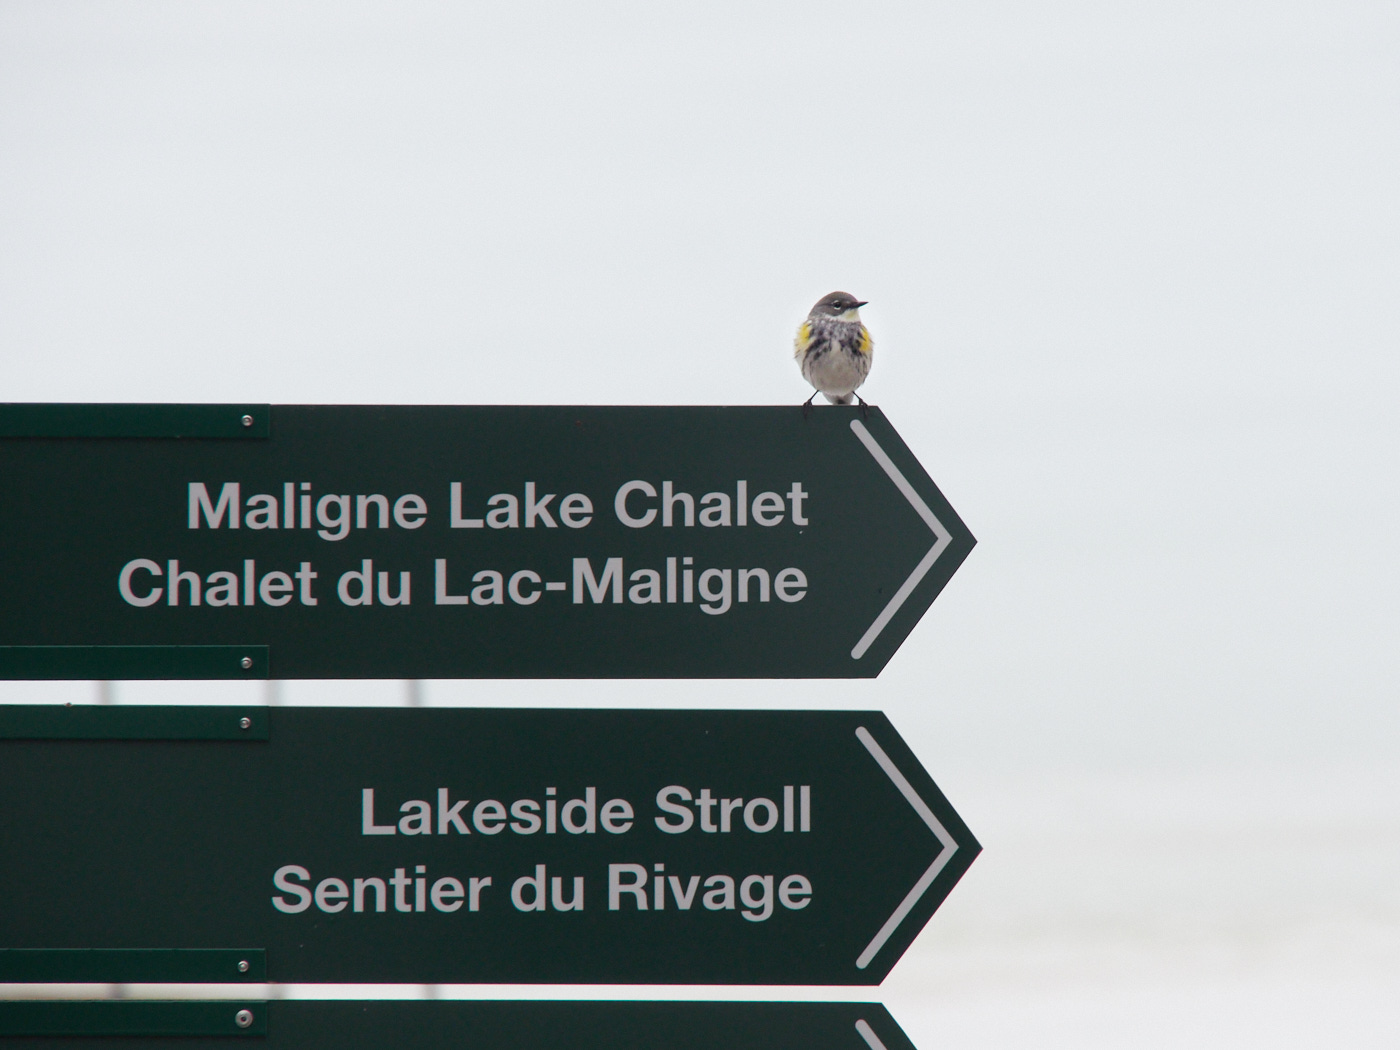 A bird poses on a directional sign.